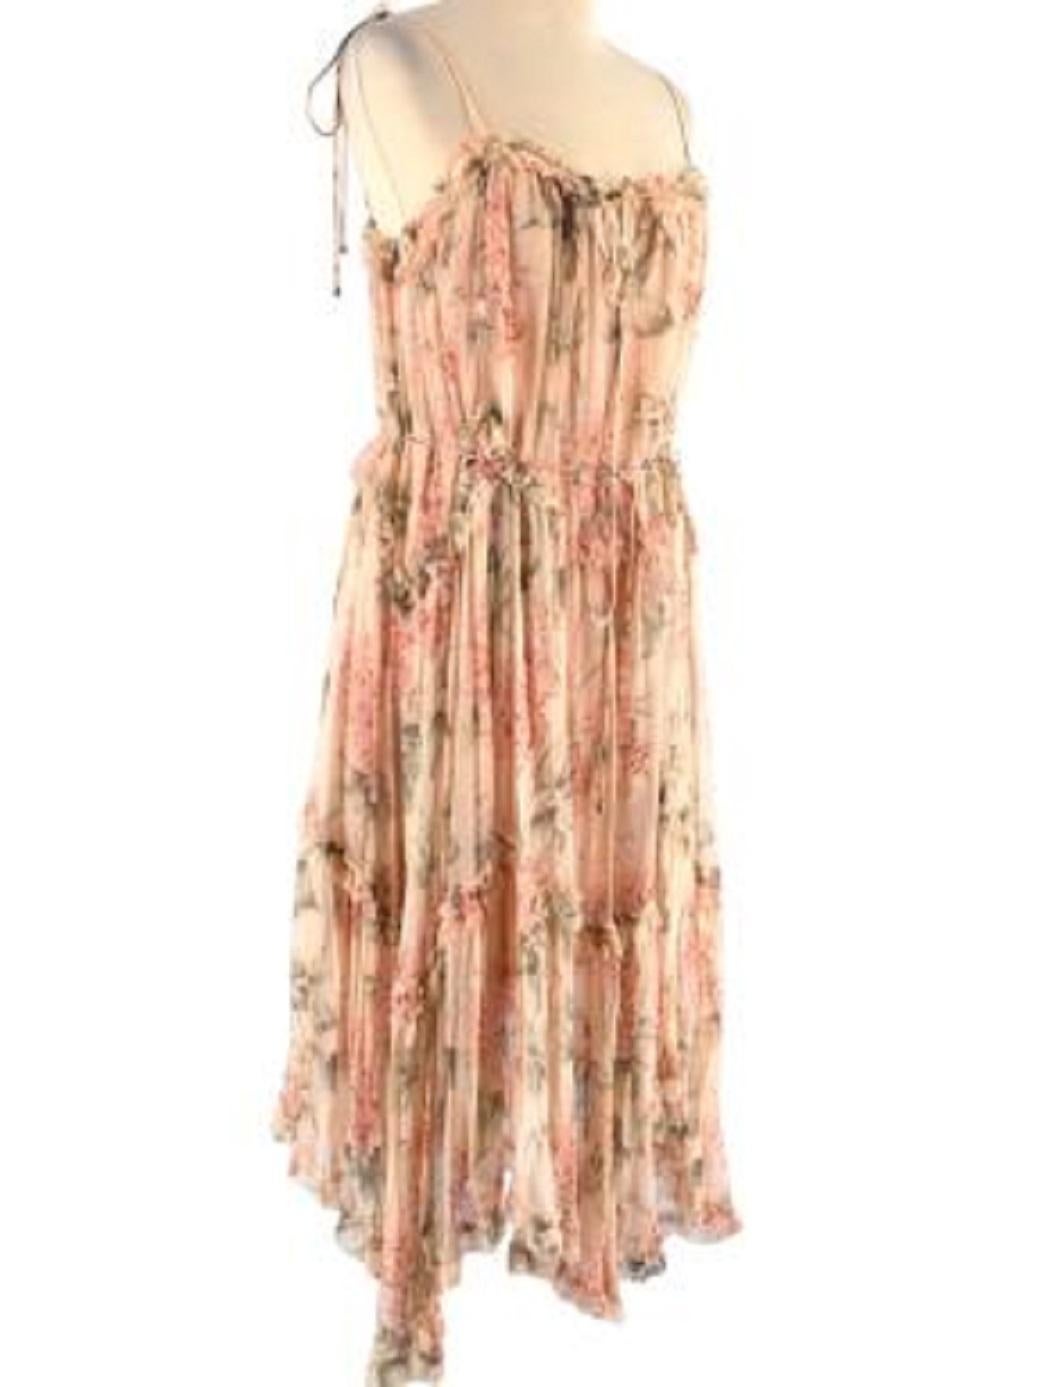 Zimmermann Prima Asymmetric Ruffled Floral Print Silk Georgette Midi Dress

-Floral-print
-Silk-georgette
-Tiered
-Ruffled
-Drawstring waist
-Ties at shoulders
-Concealed button fastenings along front
-Detachable slip to line
-Non-stretchy